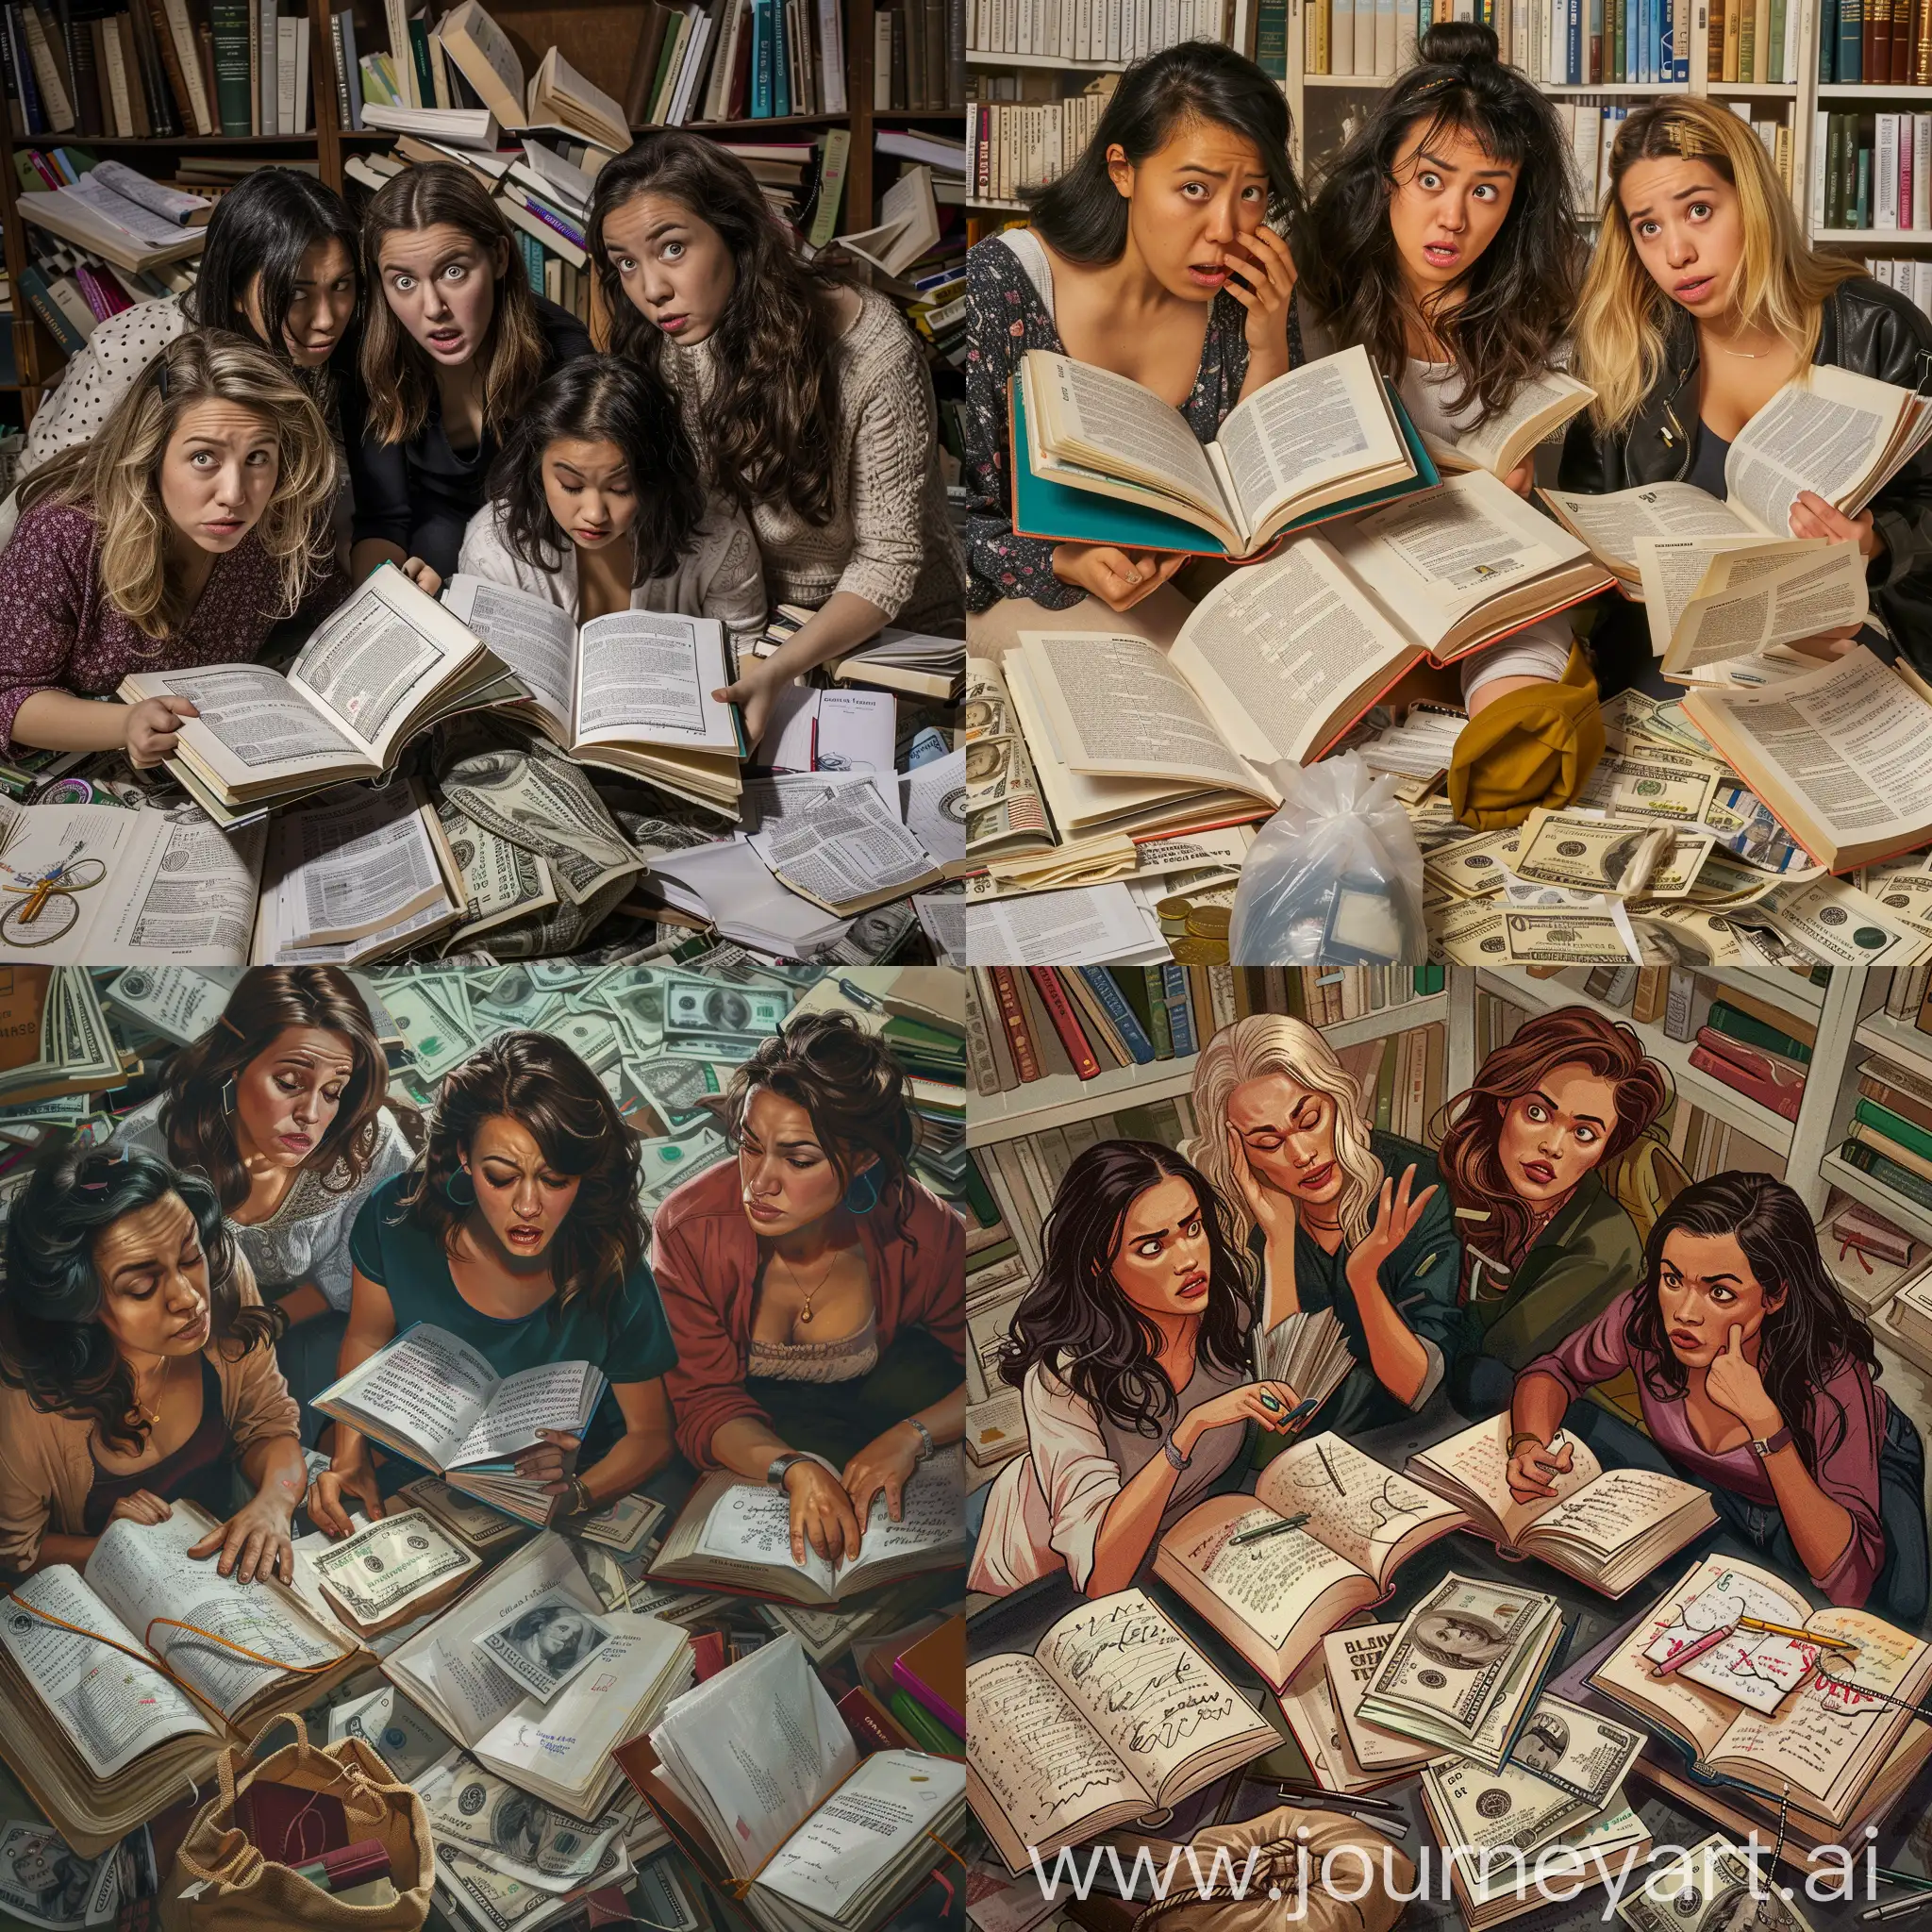 Four-Women-Confused-Over-Books-in-Messy-Room-with-Money-Bag